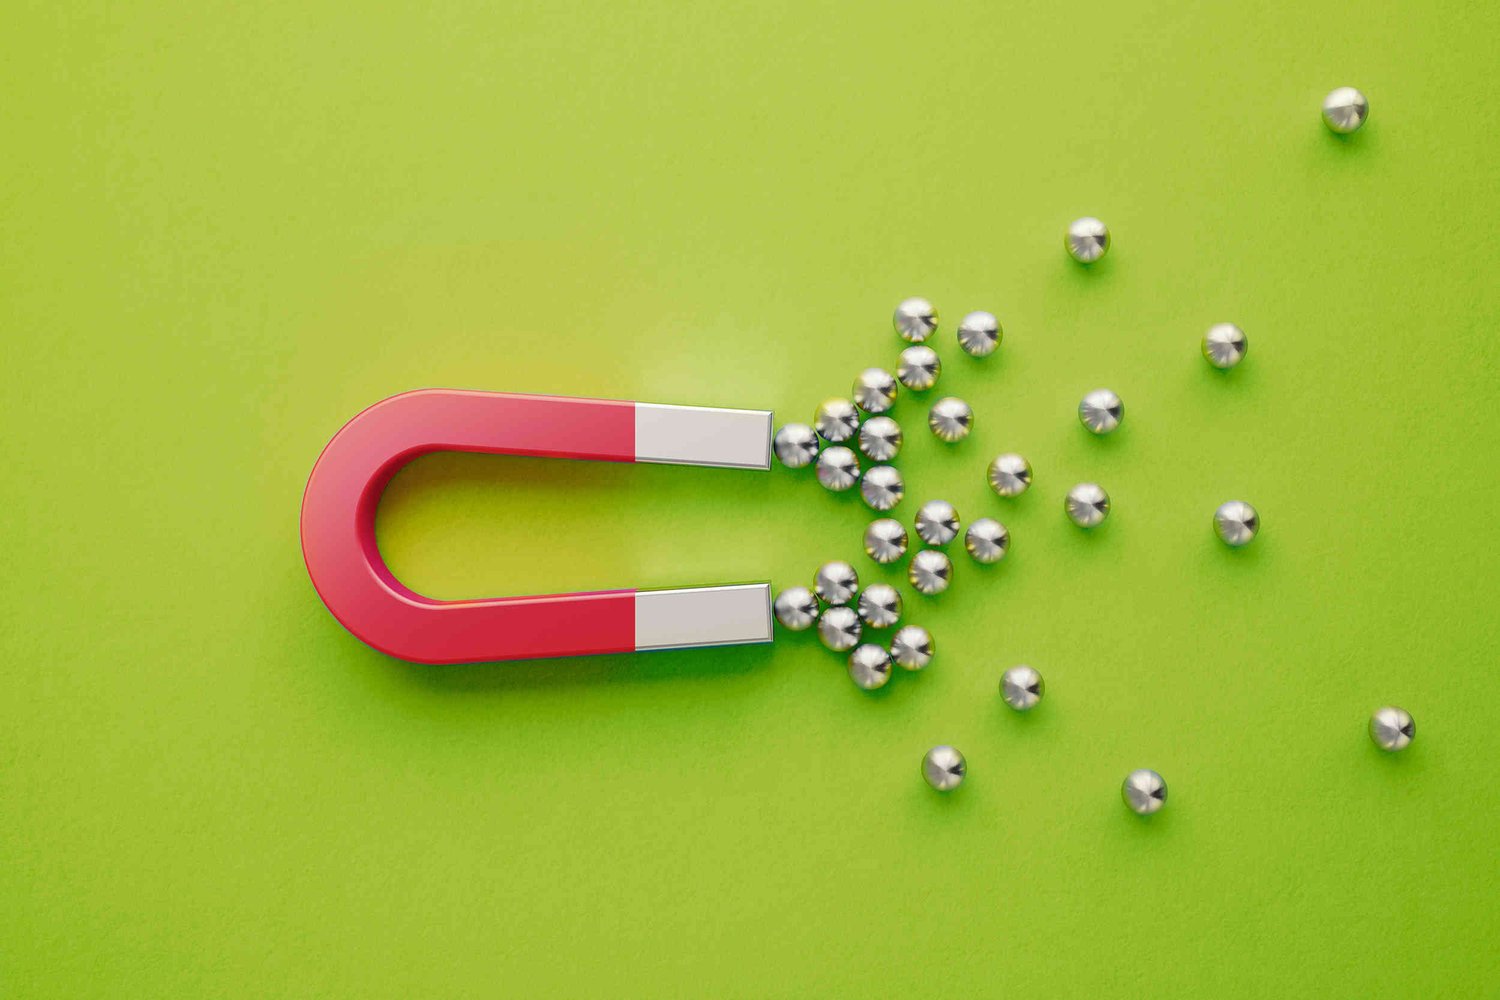 Horseshoe magnet on a green background attracting ball bearings 